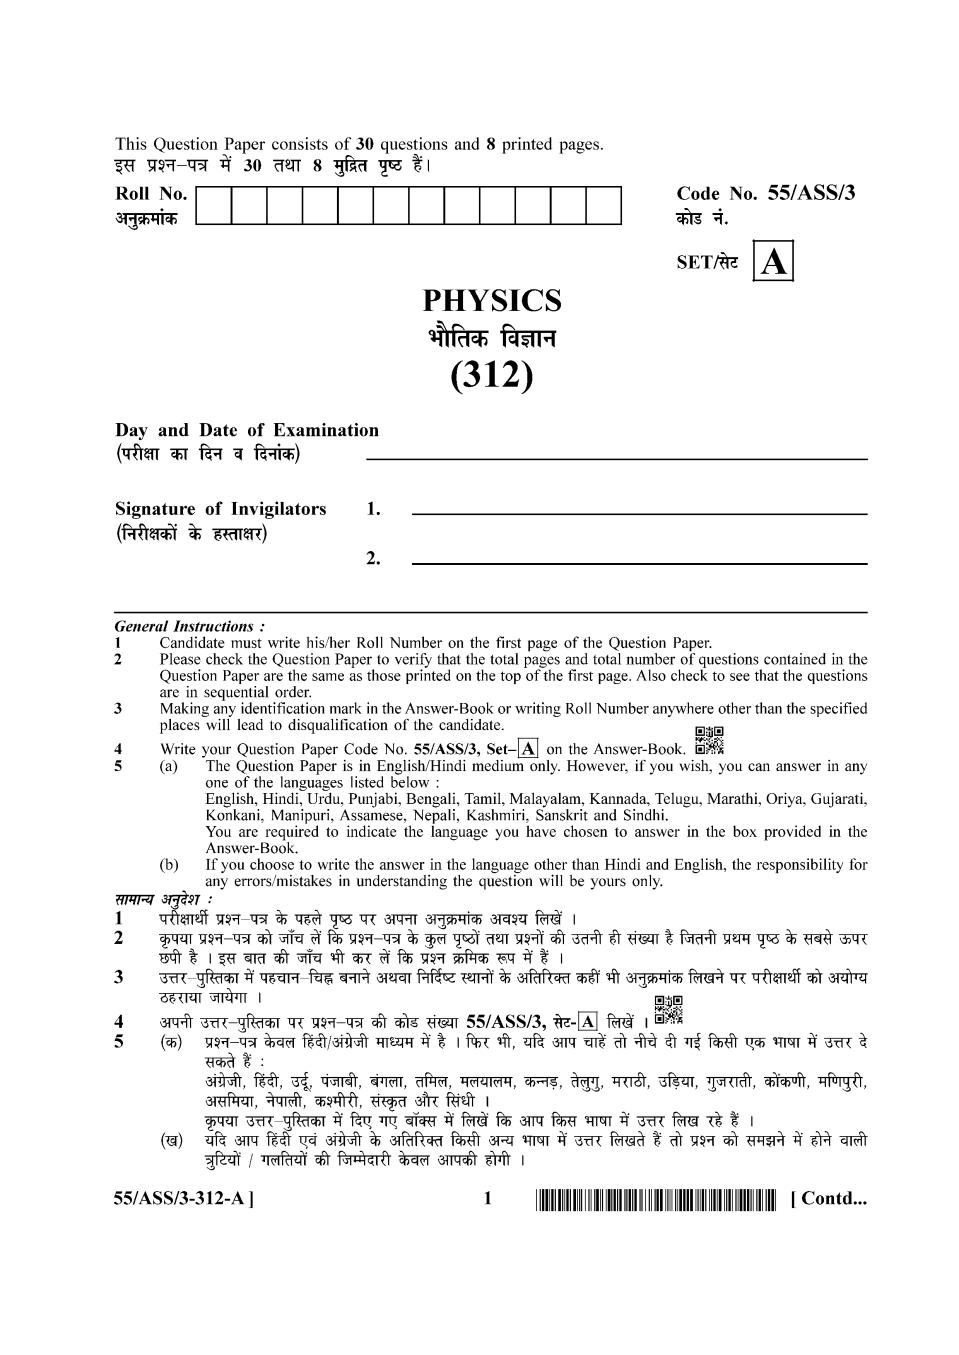 NIOS Class 12 Question Paper Oct 2017 - Physics - Page 1